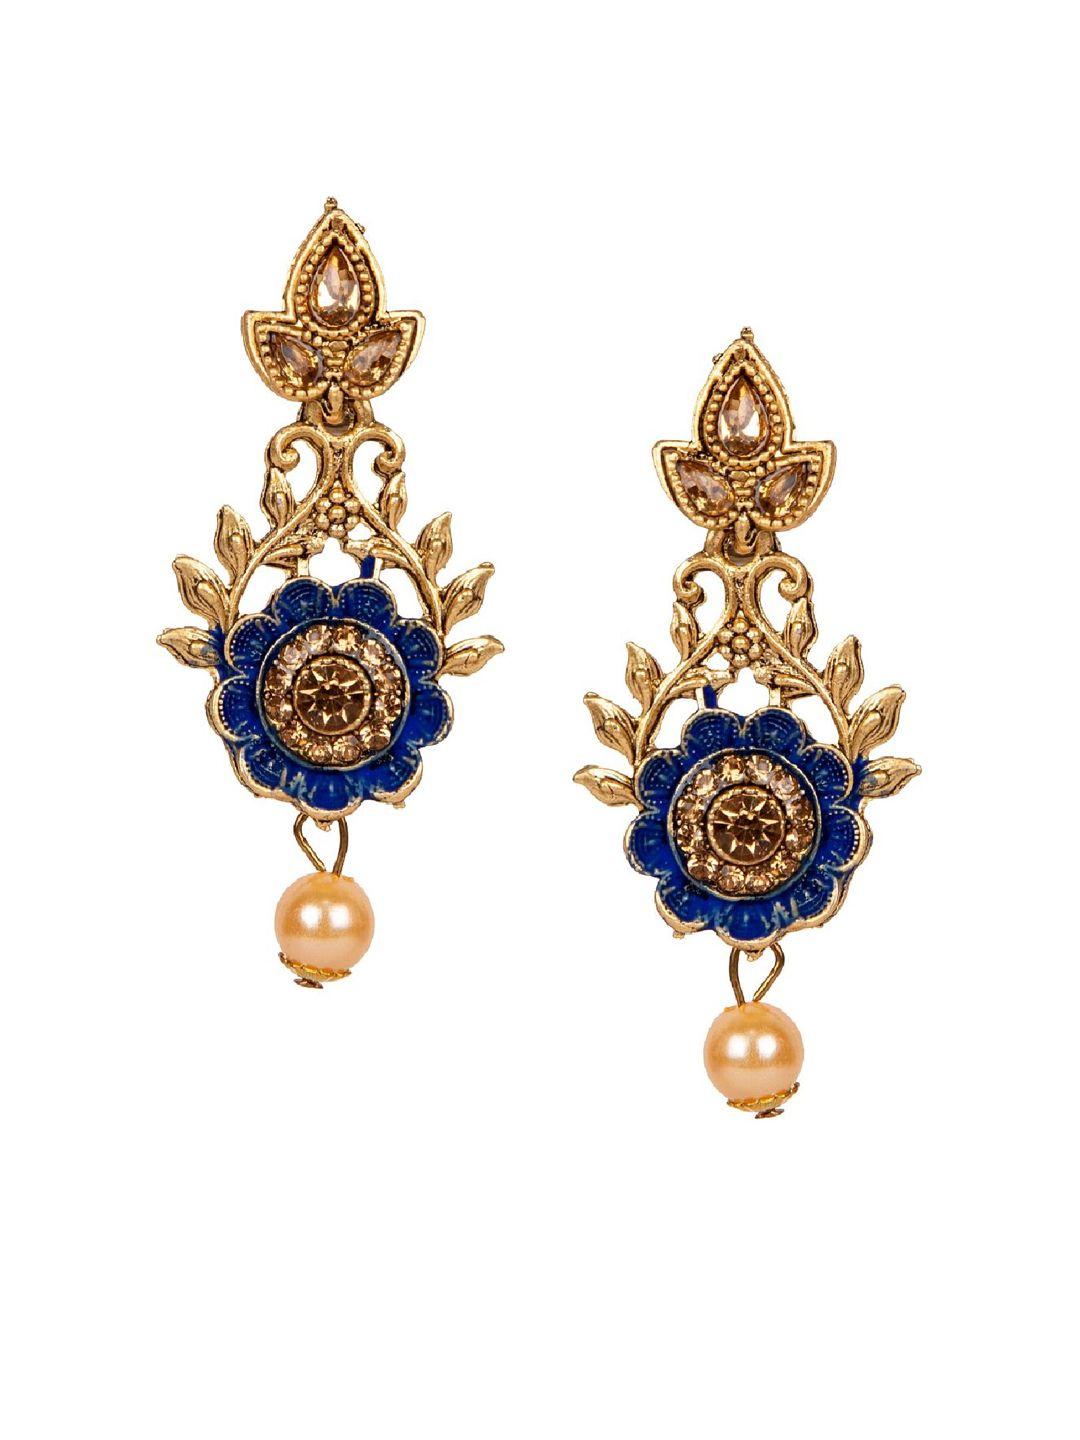 anikas creation gold-plated & navy blue enamelled classic drop earrings